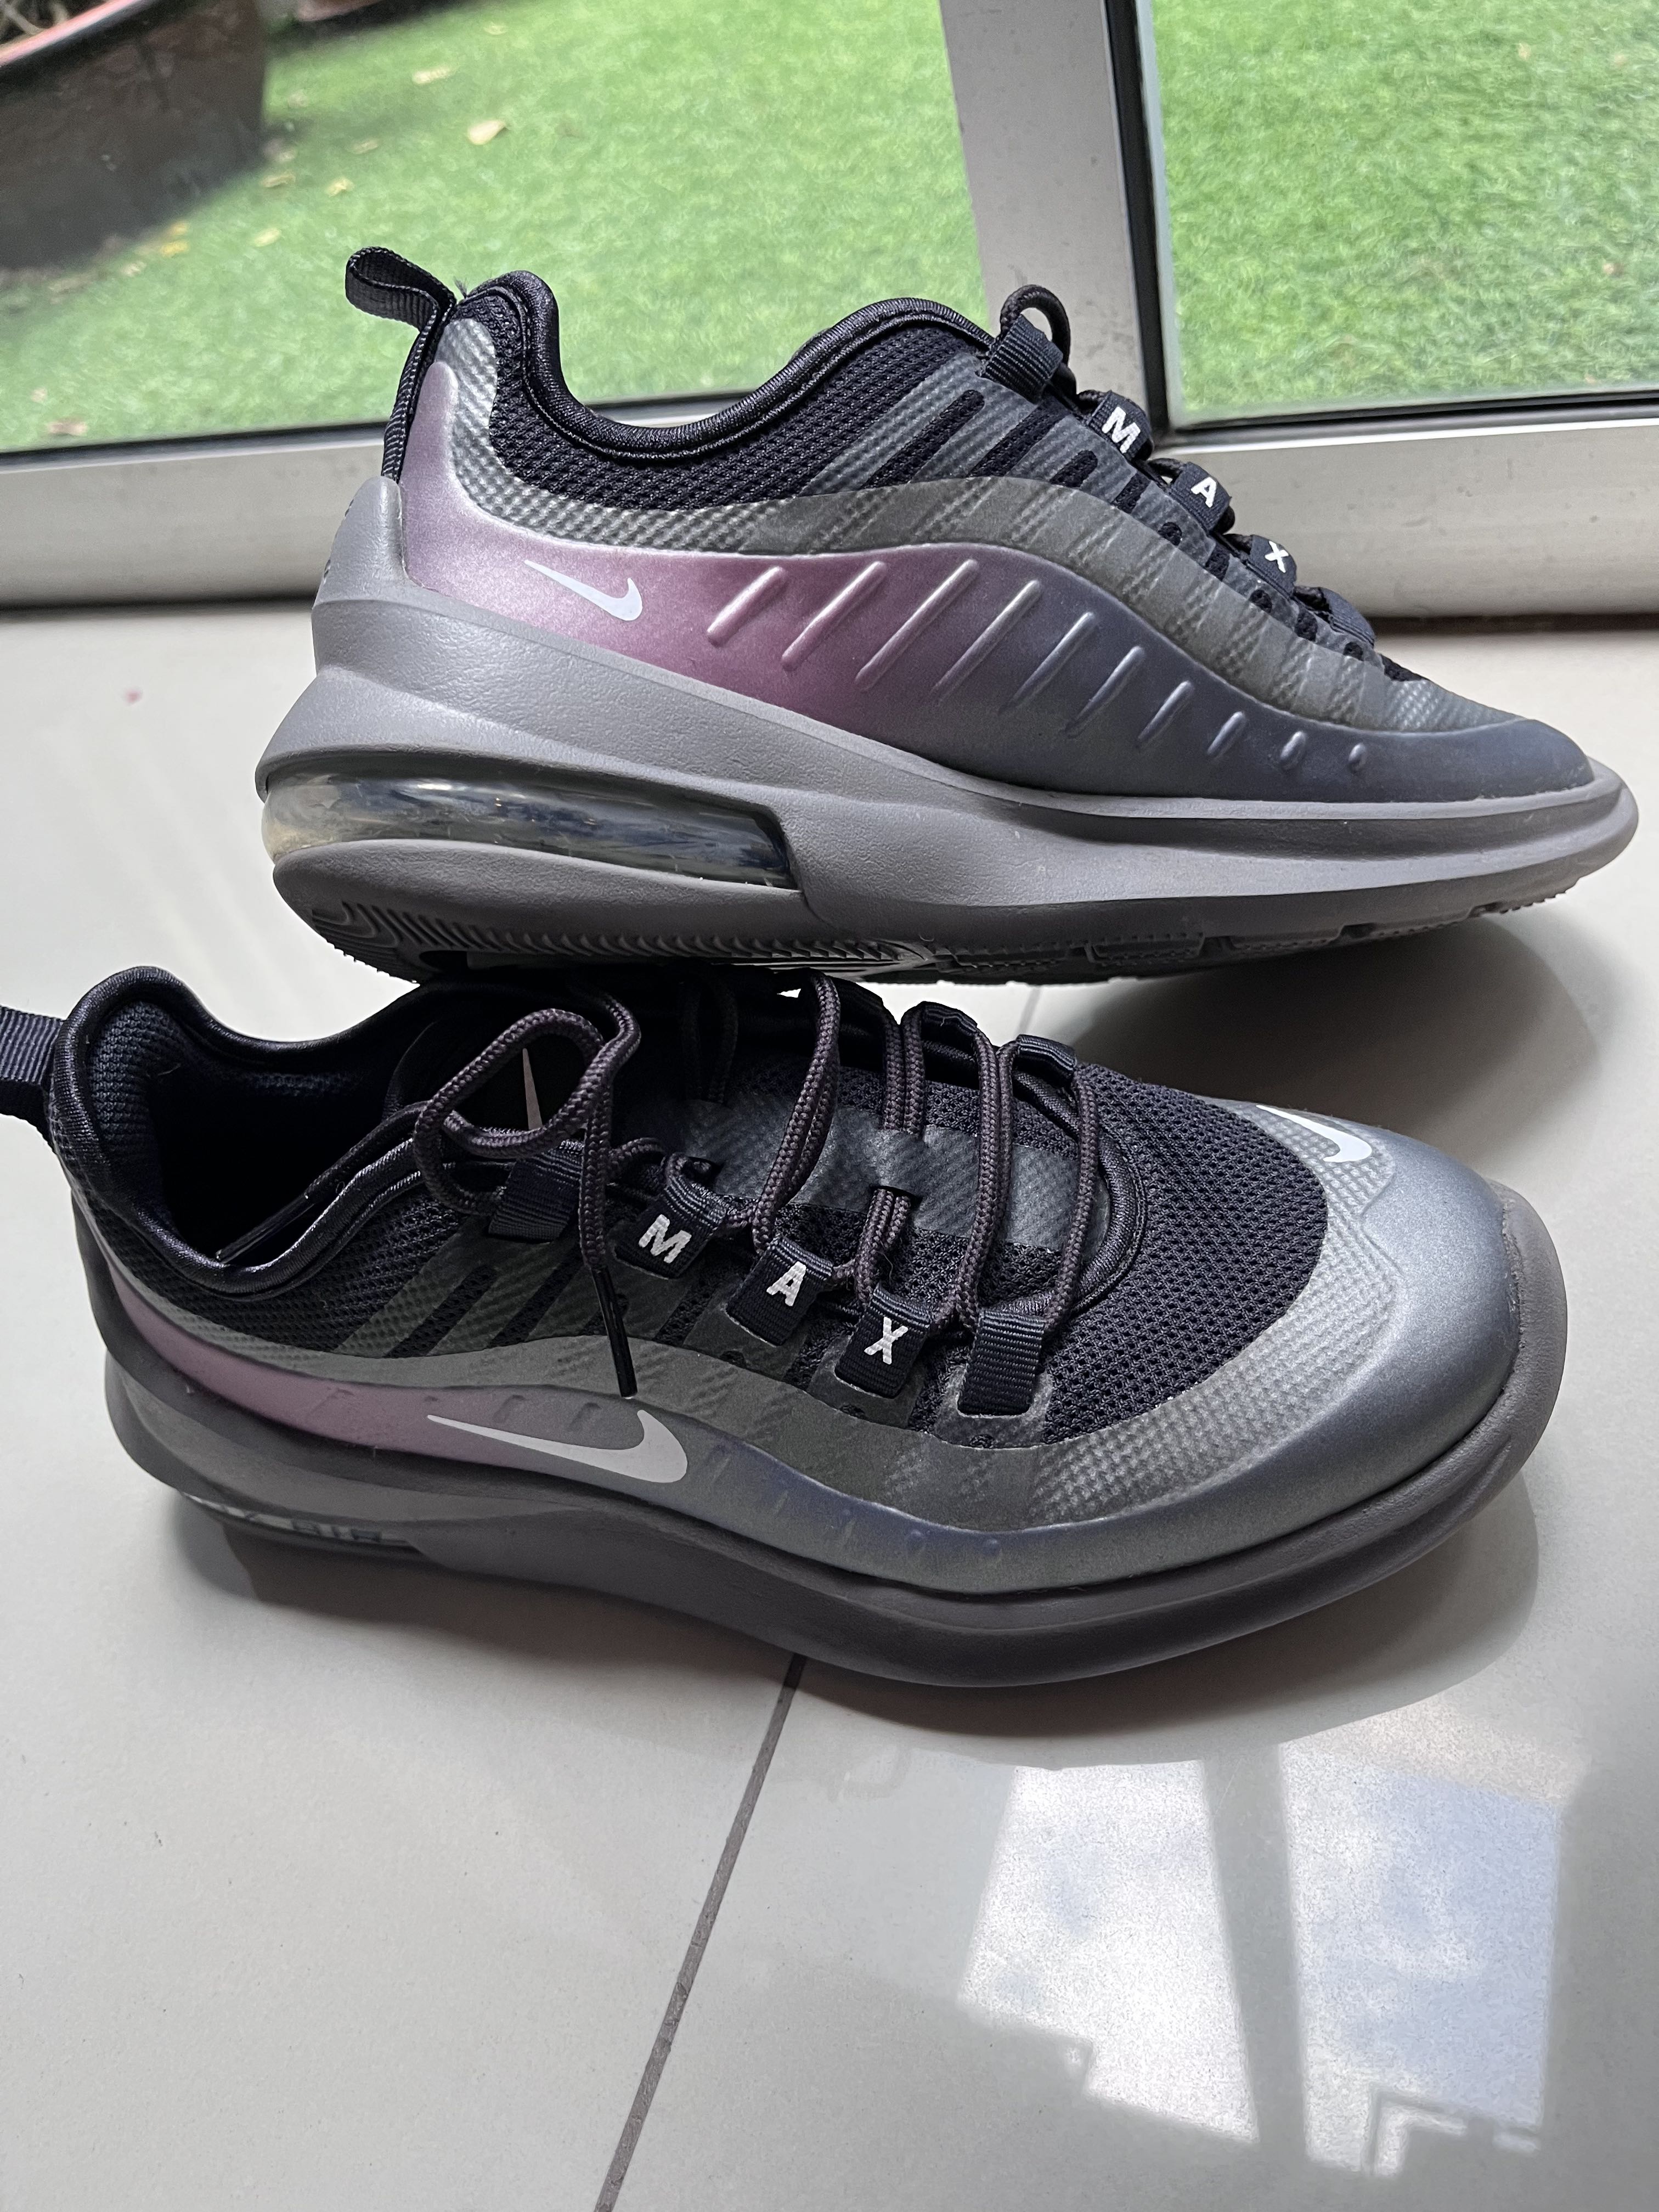 nike max air shoes used